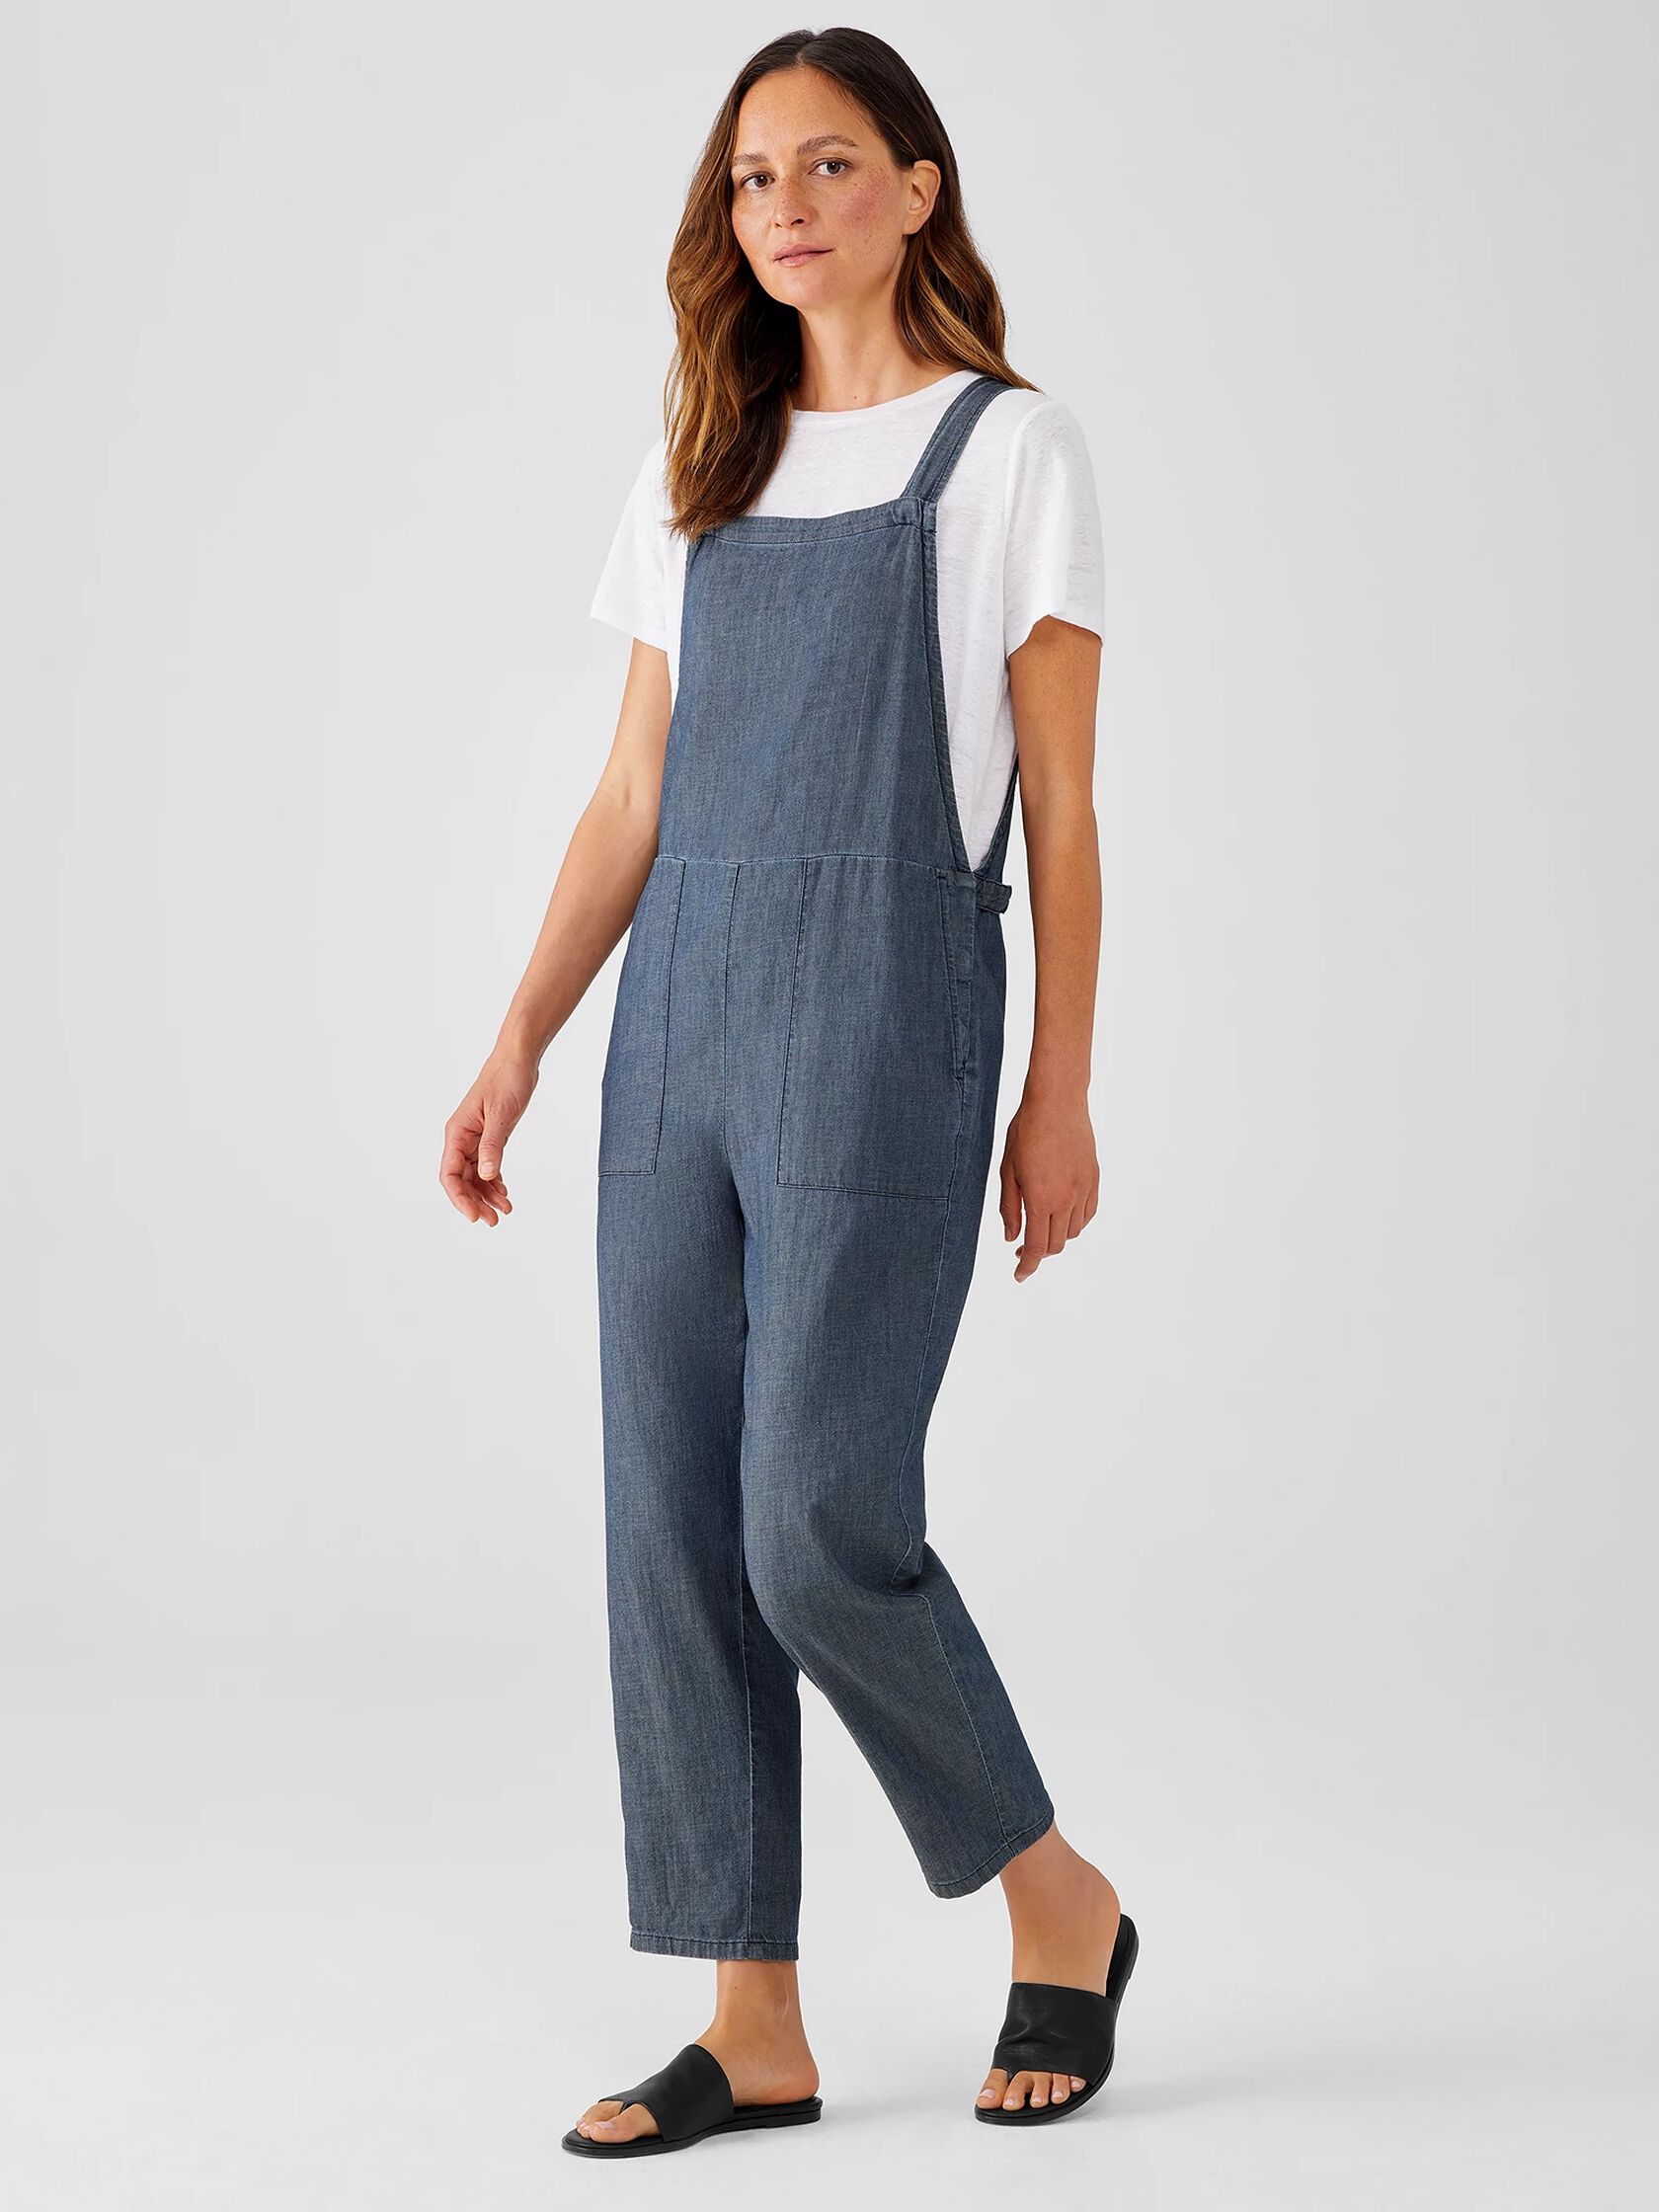 Airy Organic Cotton Twill Overalls | EILEEN FISHER